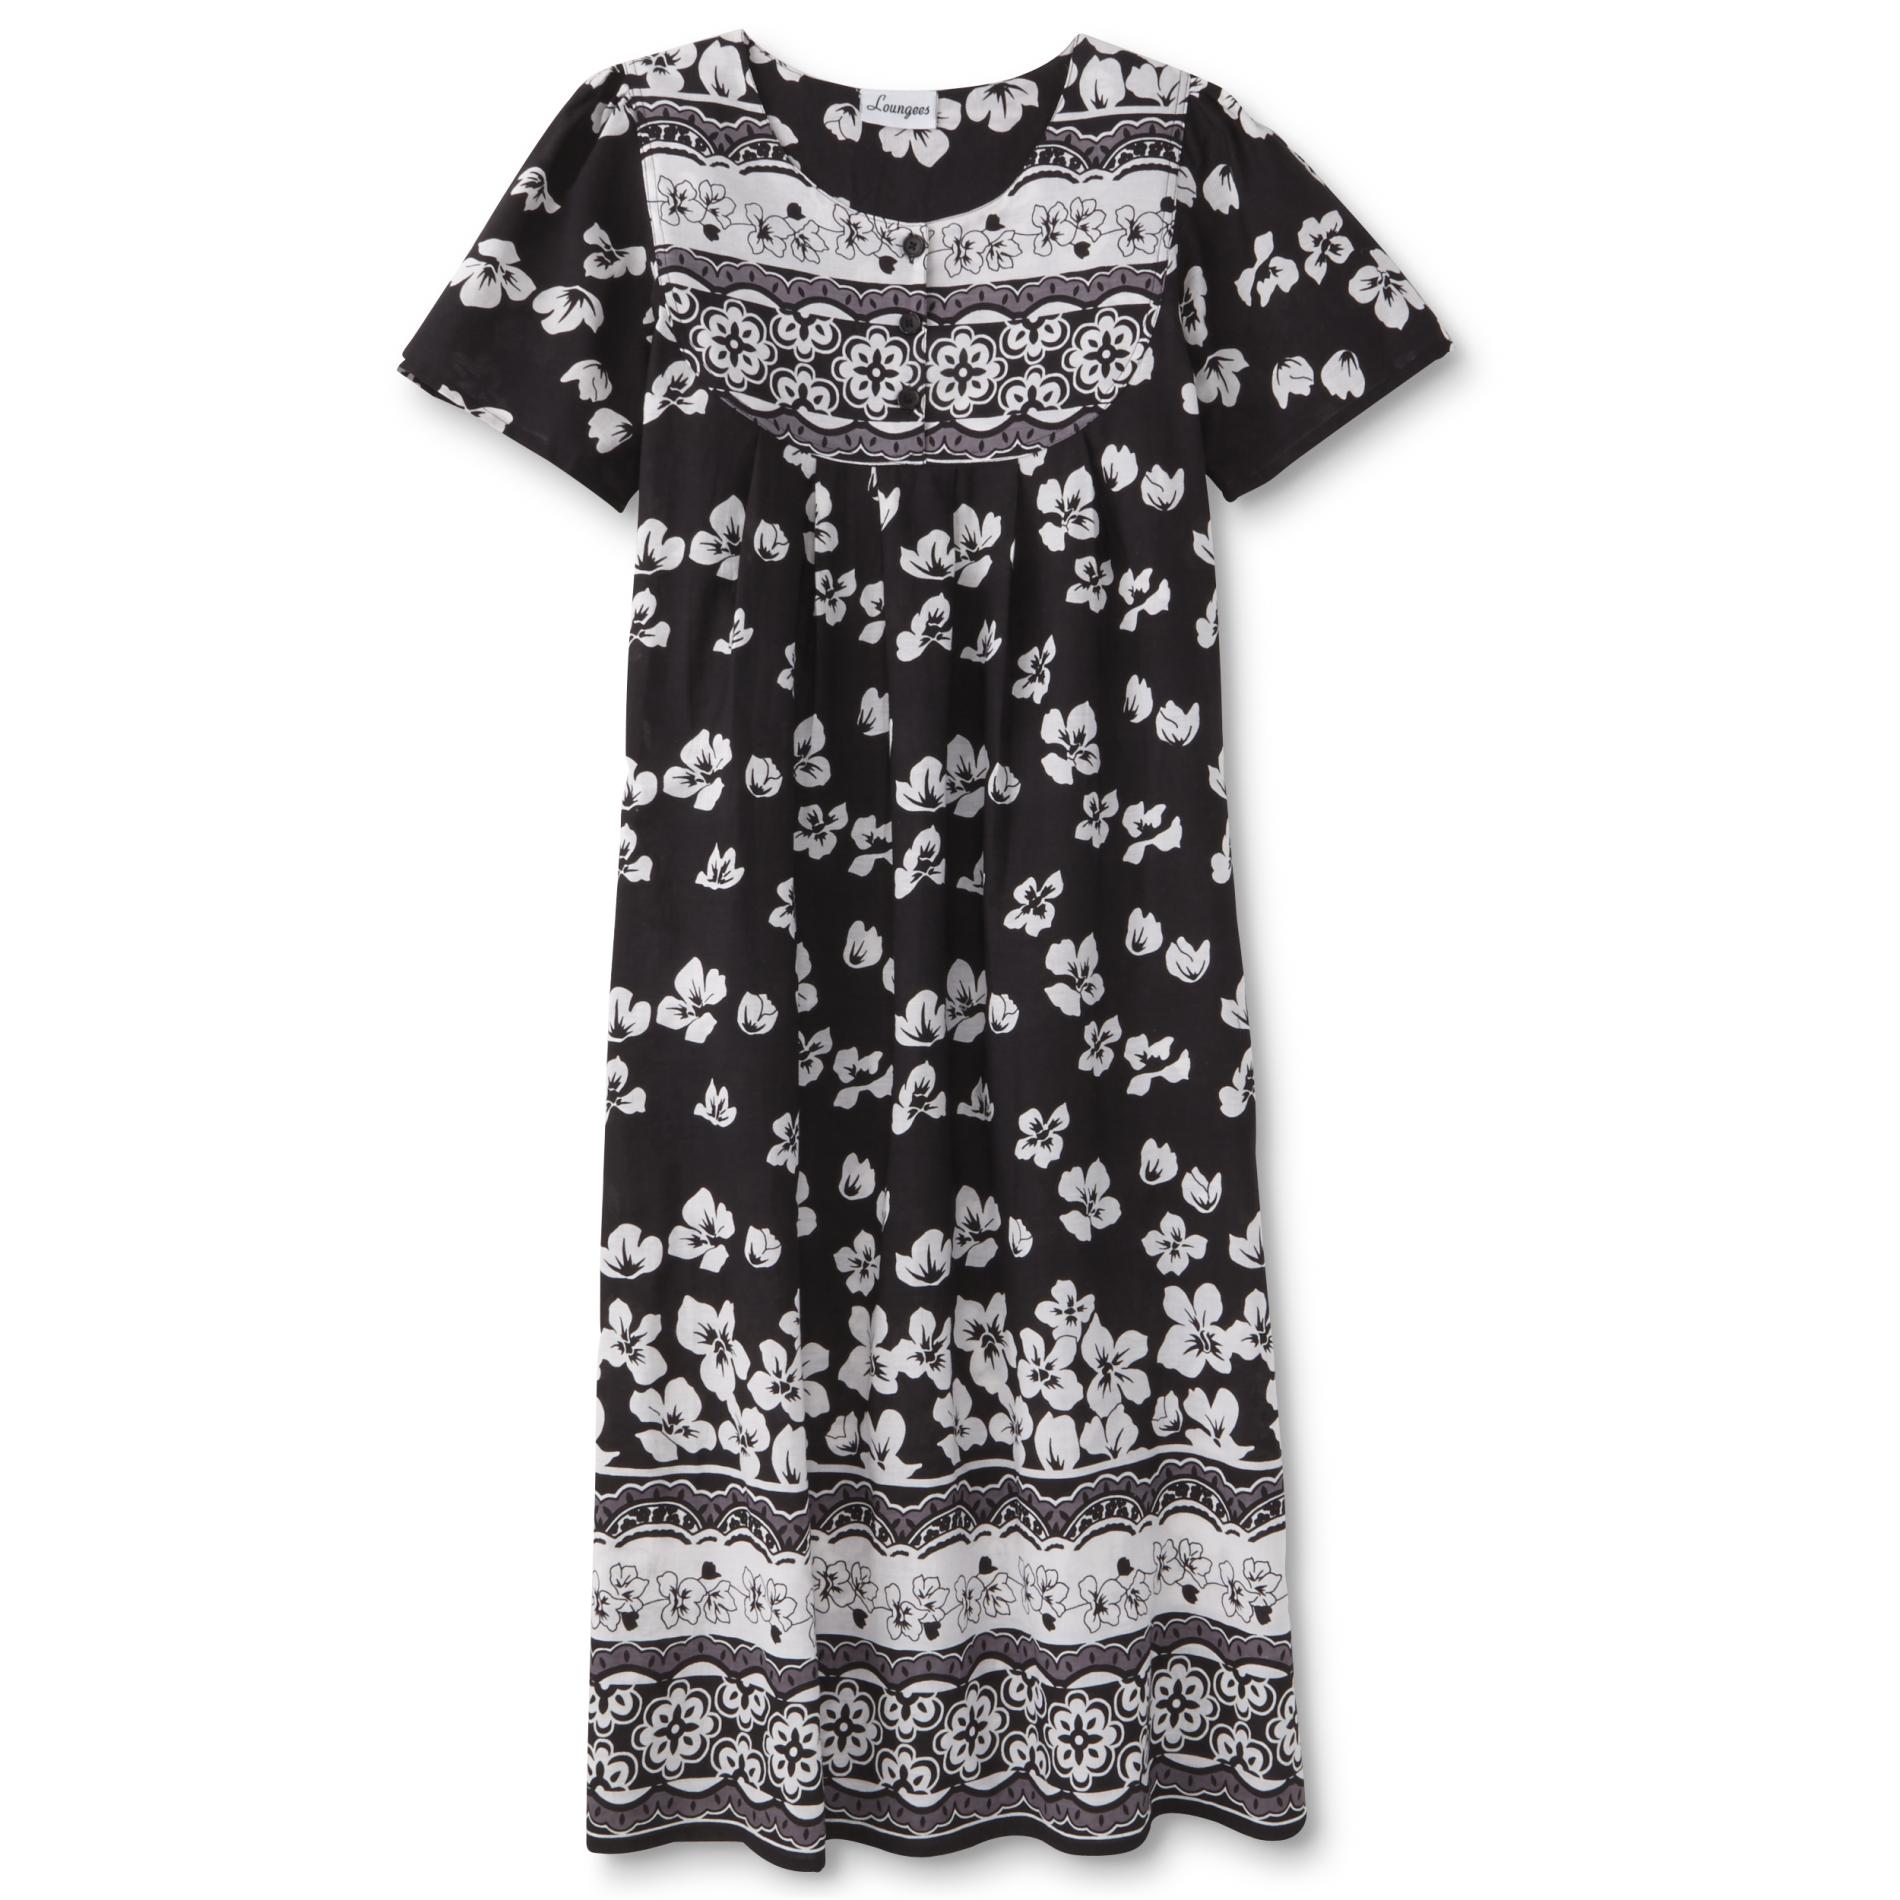 Loungees Women's Plus Lounge Dress - Floral